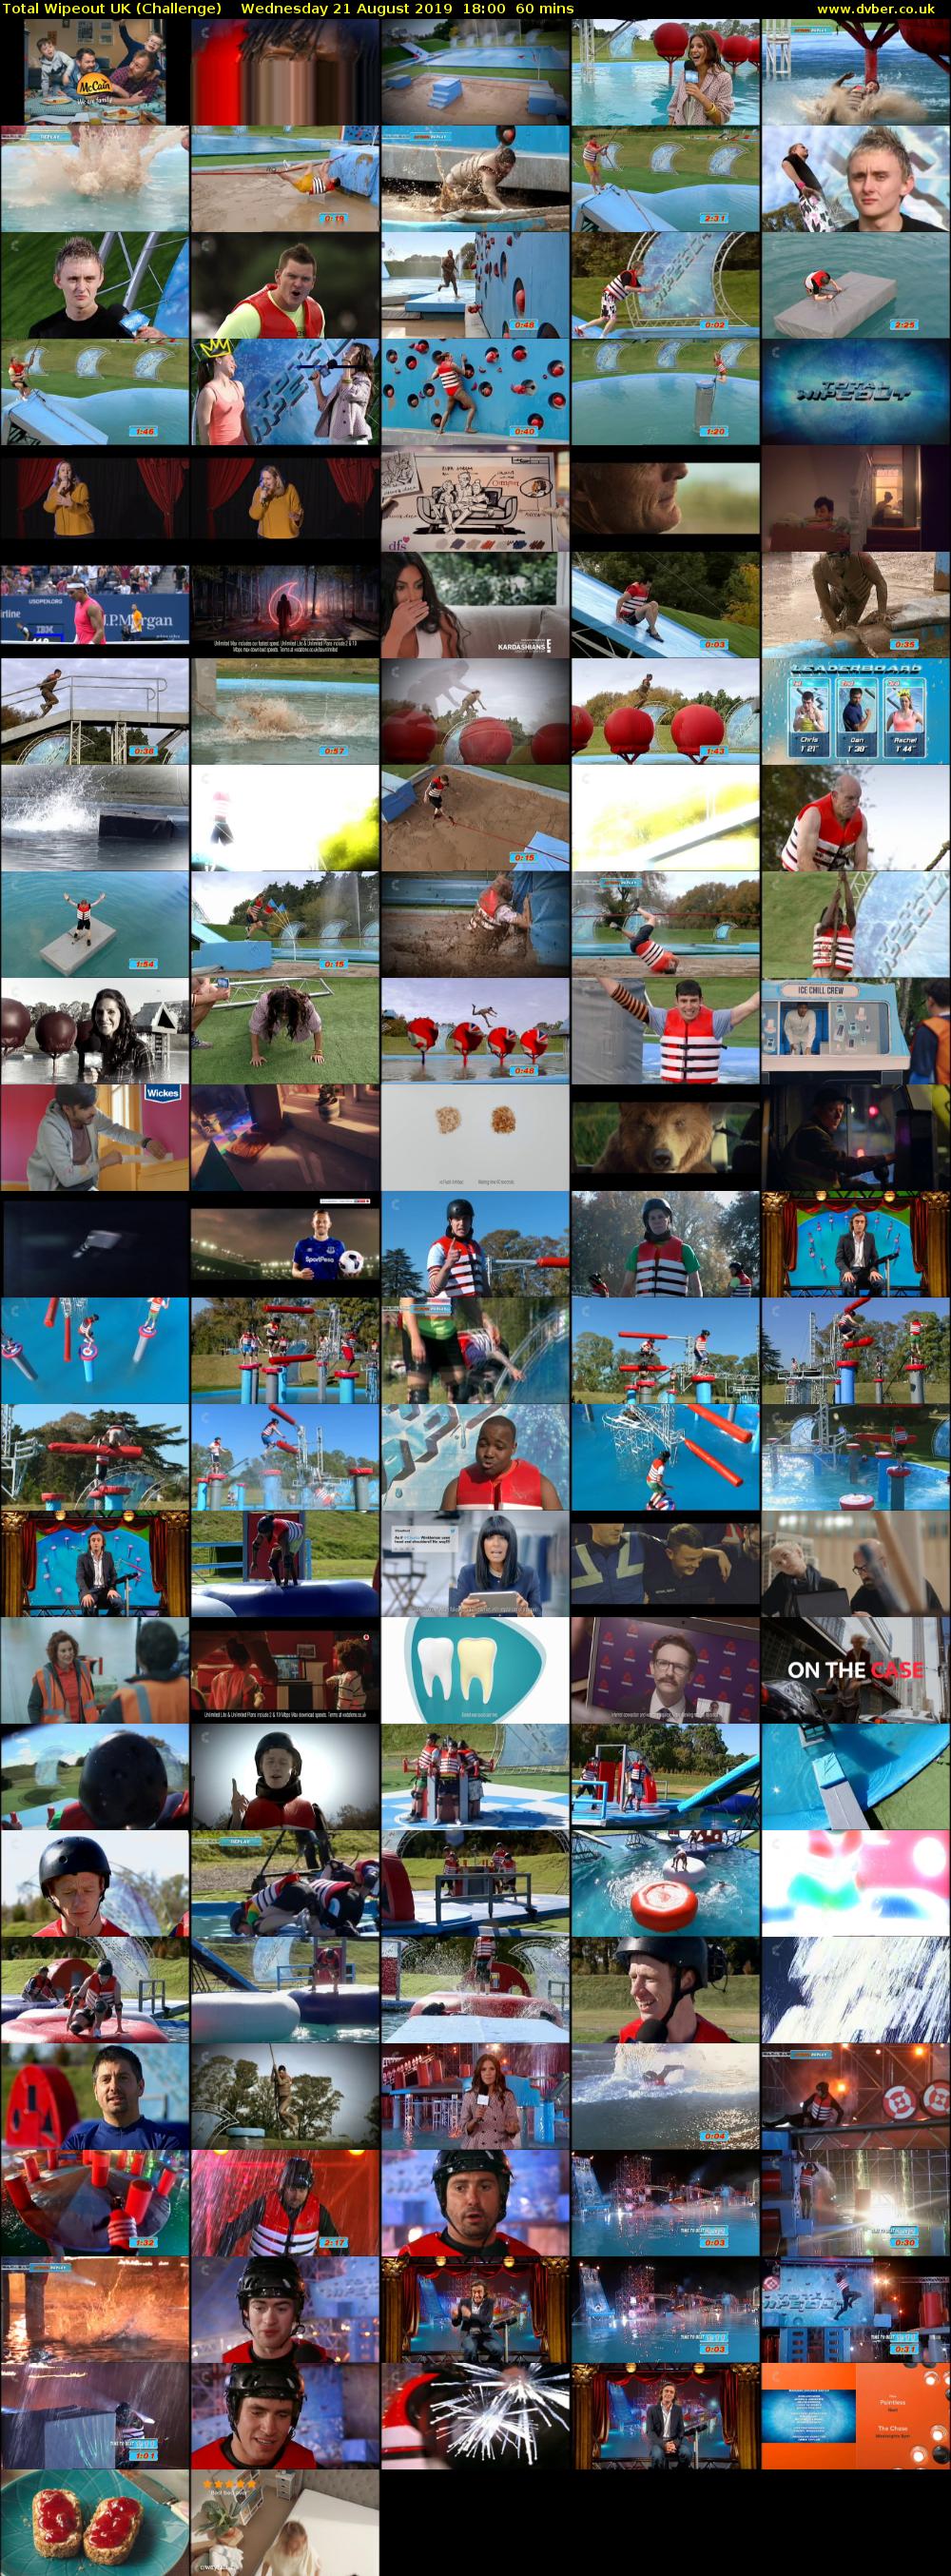 Total Wipeout UK (Challenge) Wednesday 21 August 2019 18:00 - 19:00